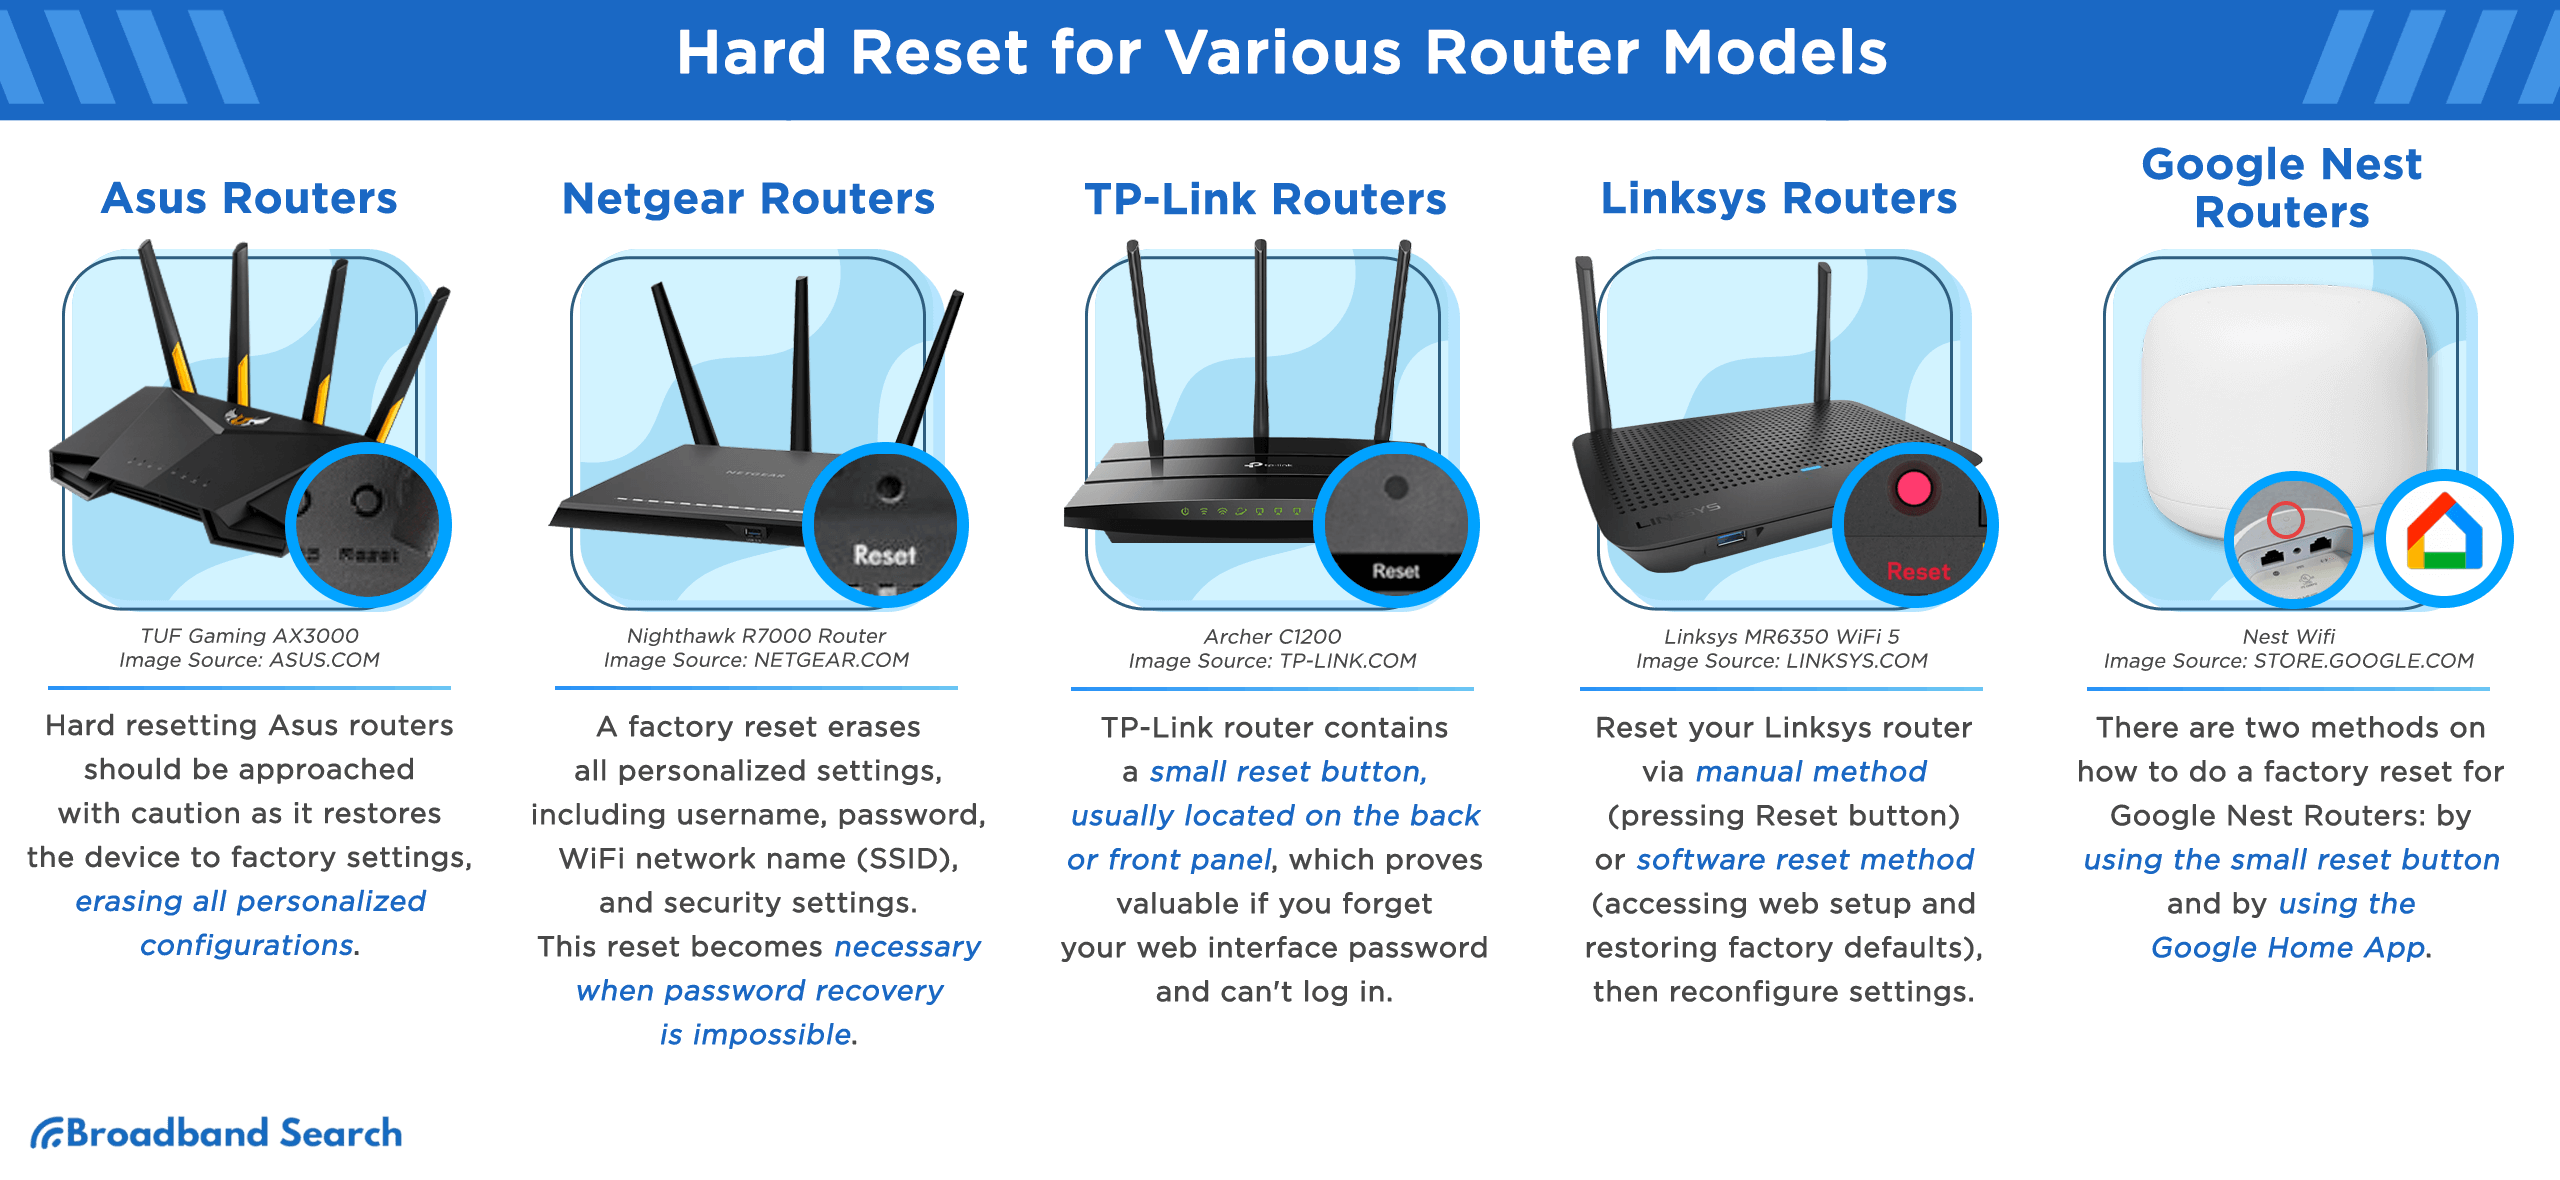 Hard reset for various router models